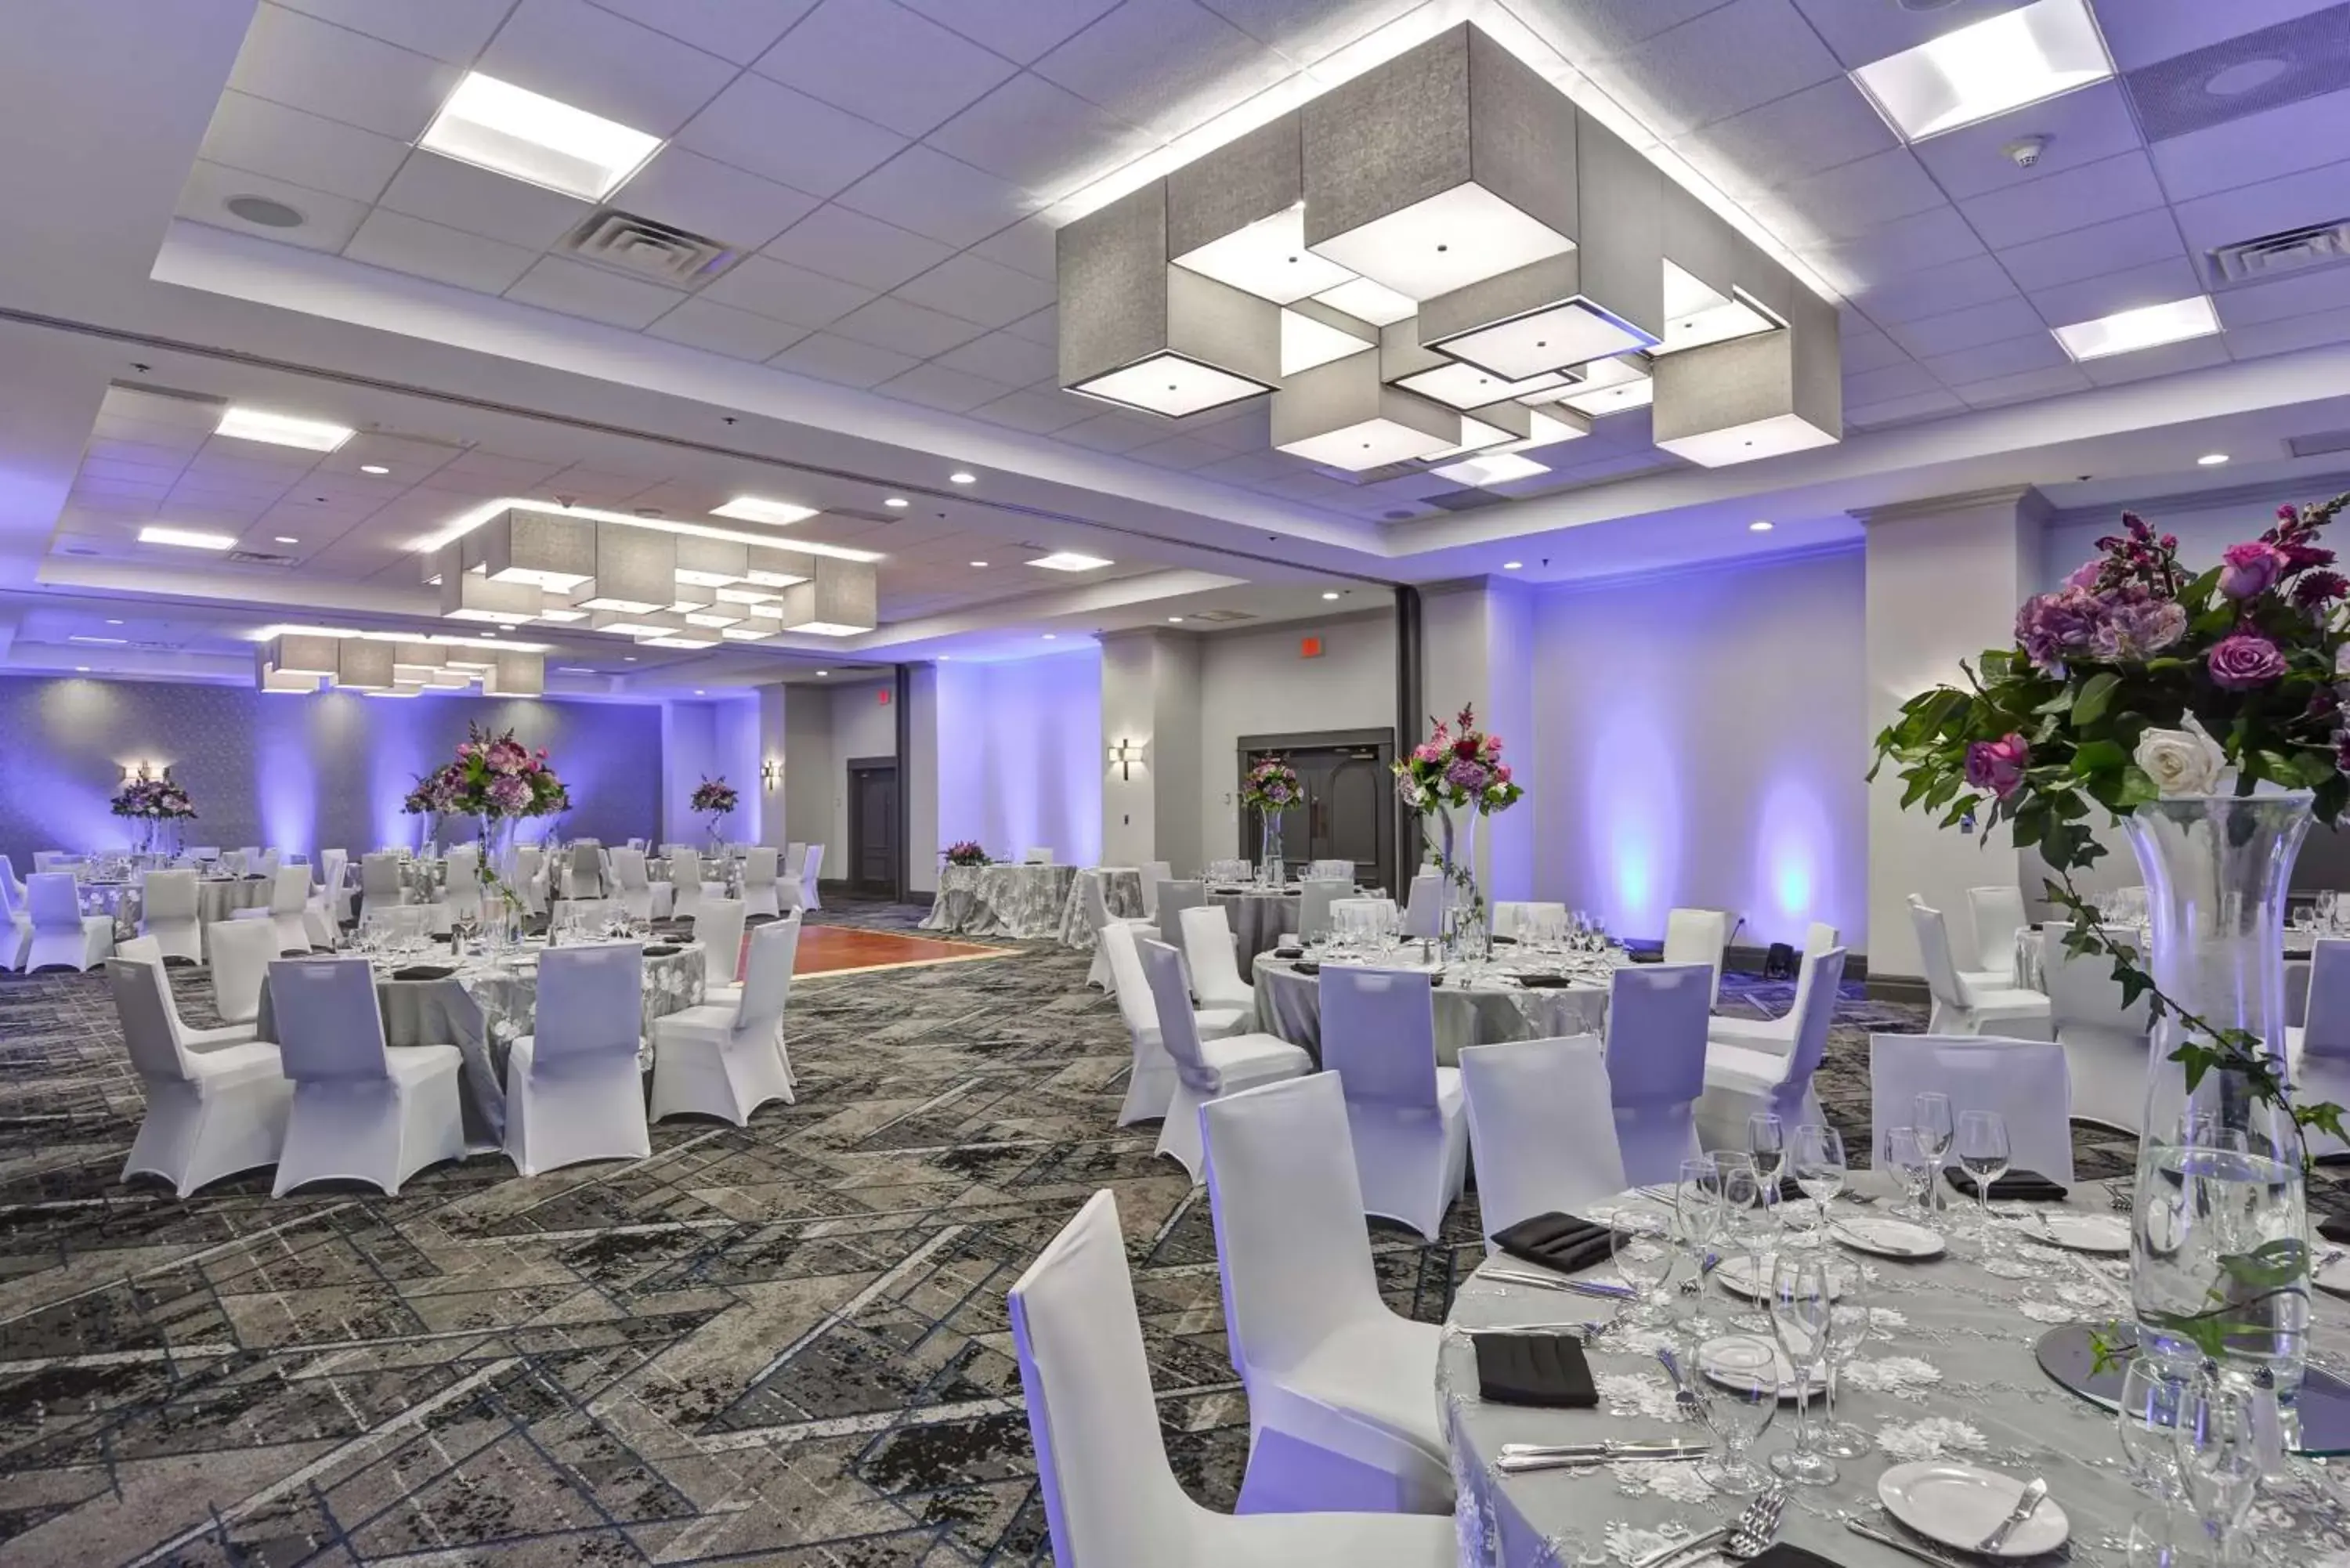 Meeting/conference room, Banquet Facilities in Embassy Suites by Hilton Miami International Airport